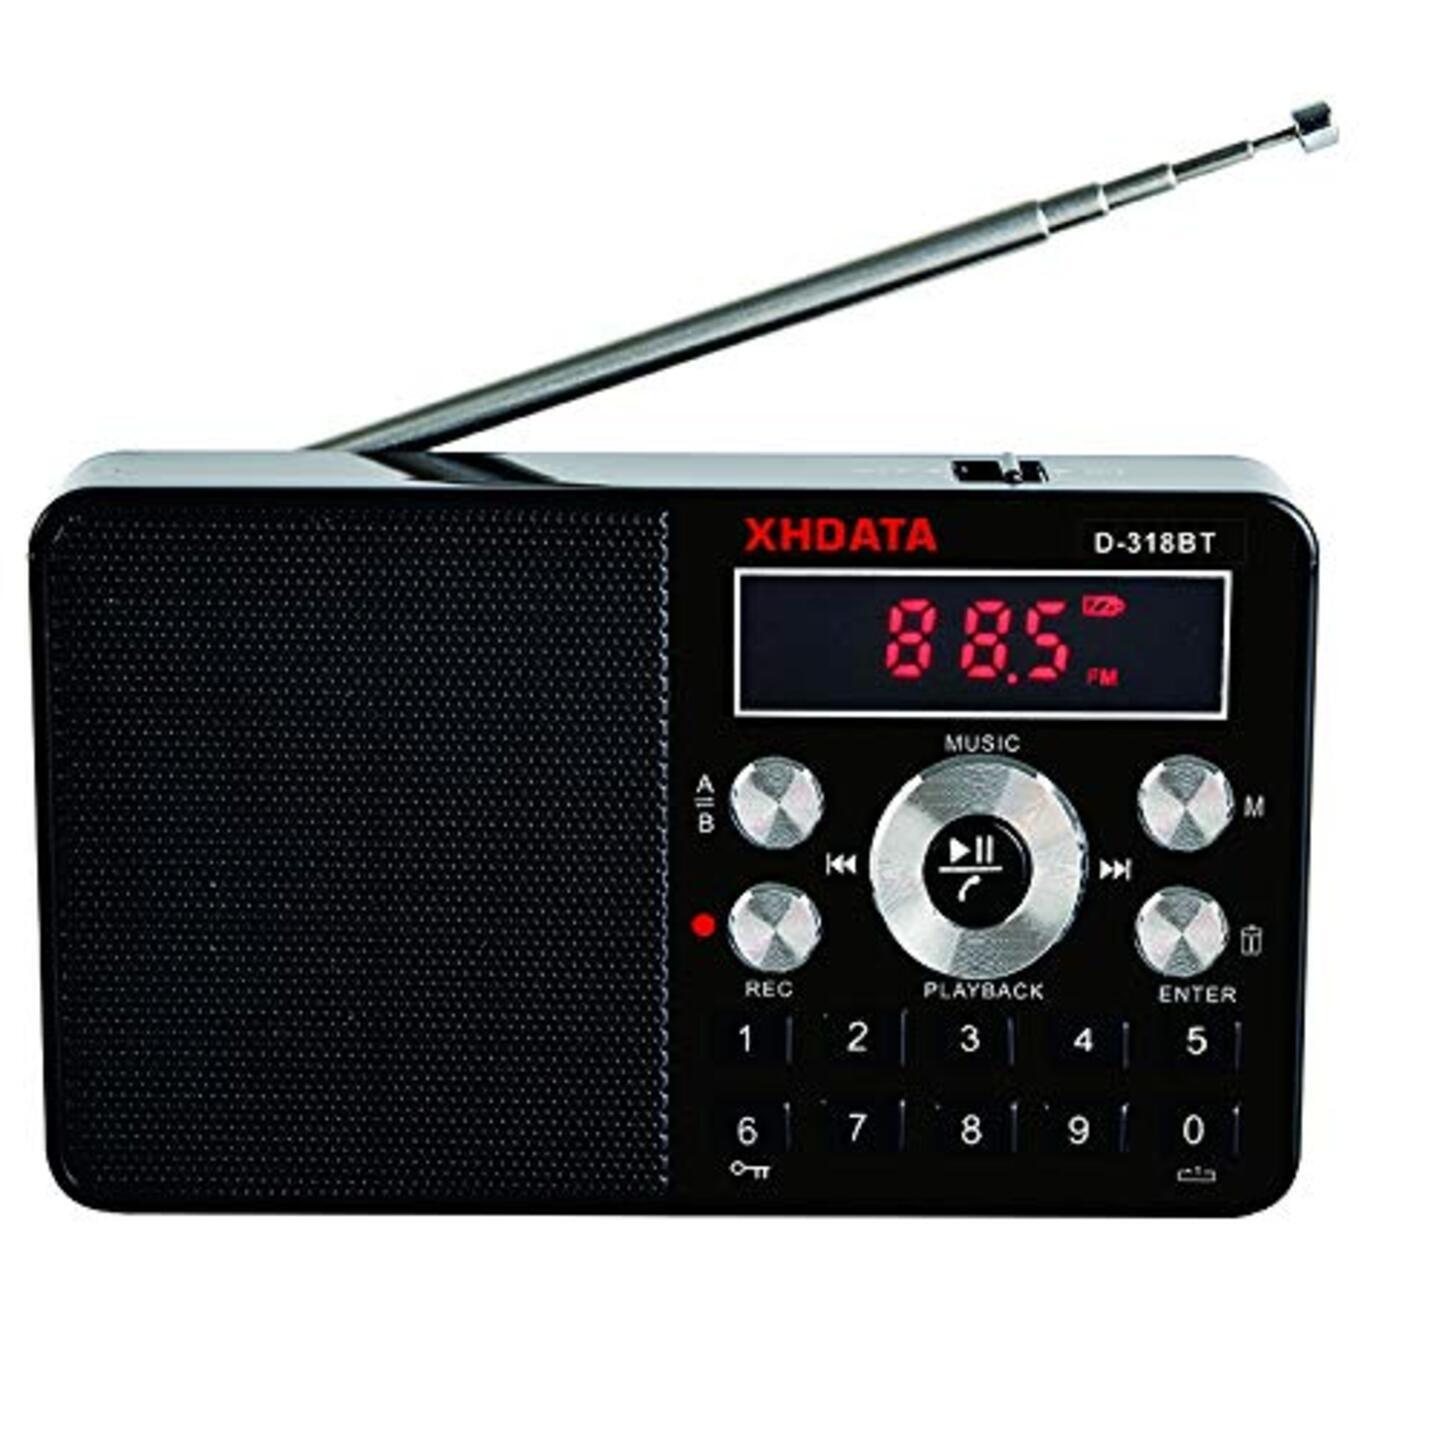 XHDATA Rechargeable FM Radio with Wireless Bluetooth Speaker and Voice recorder D-318BT